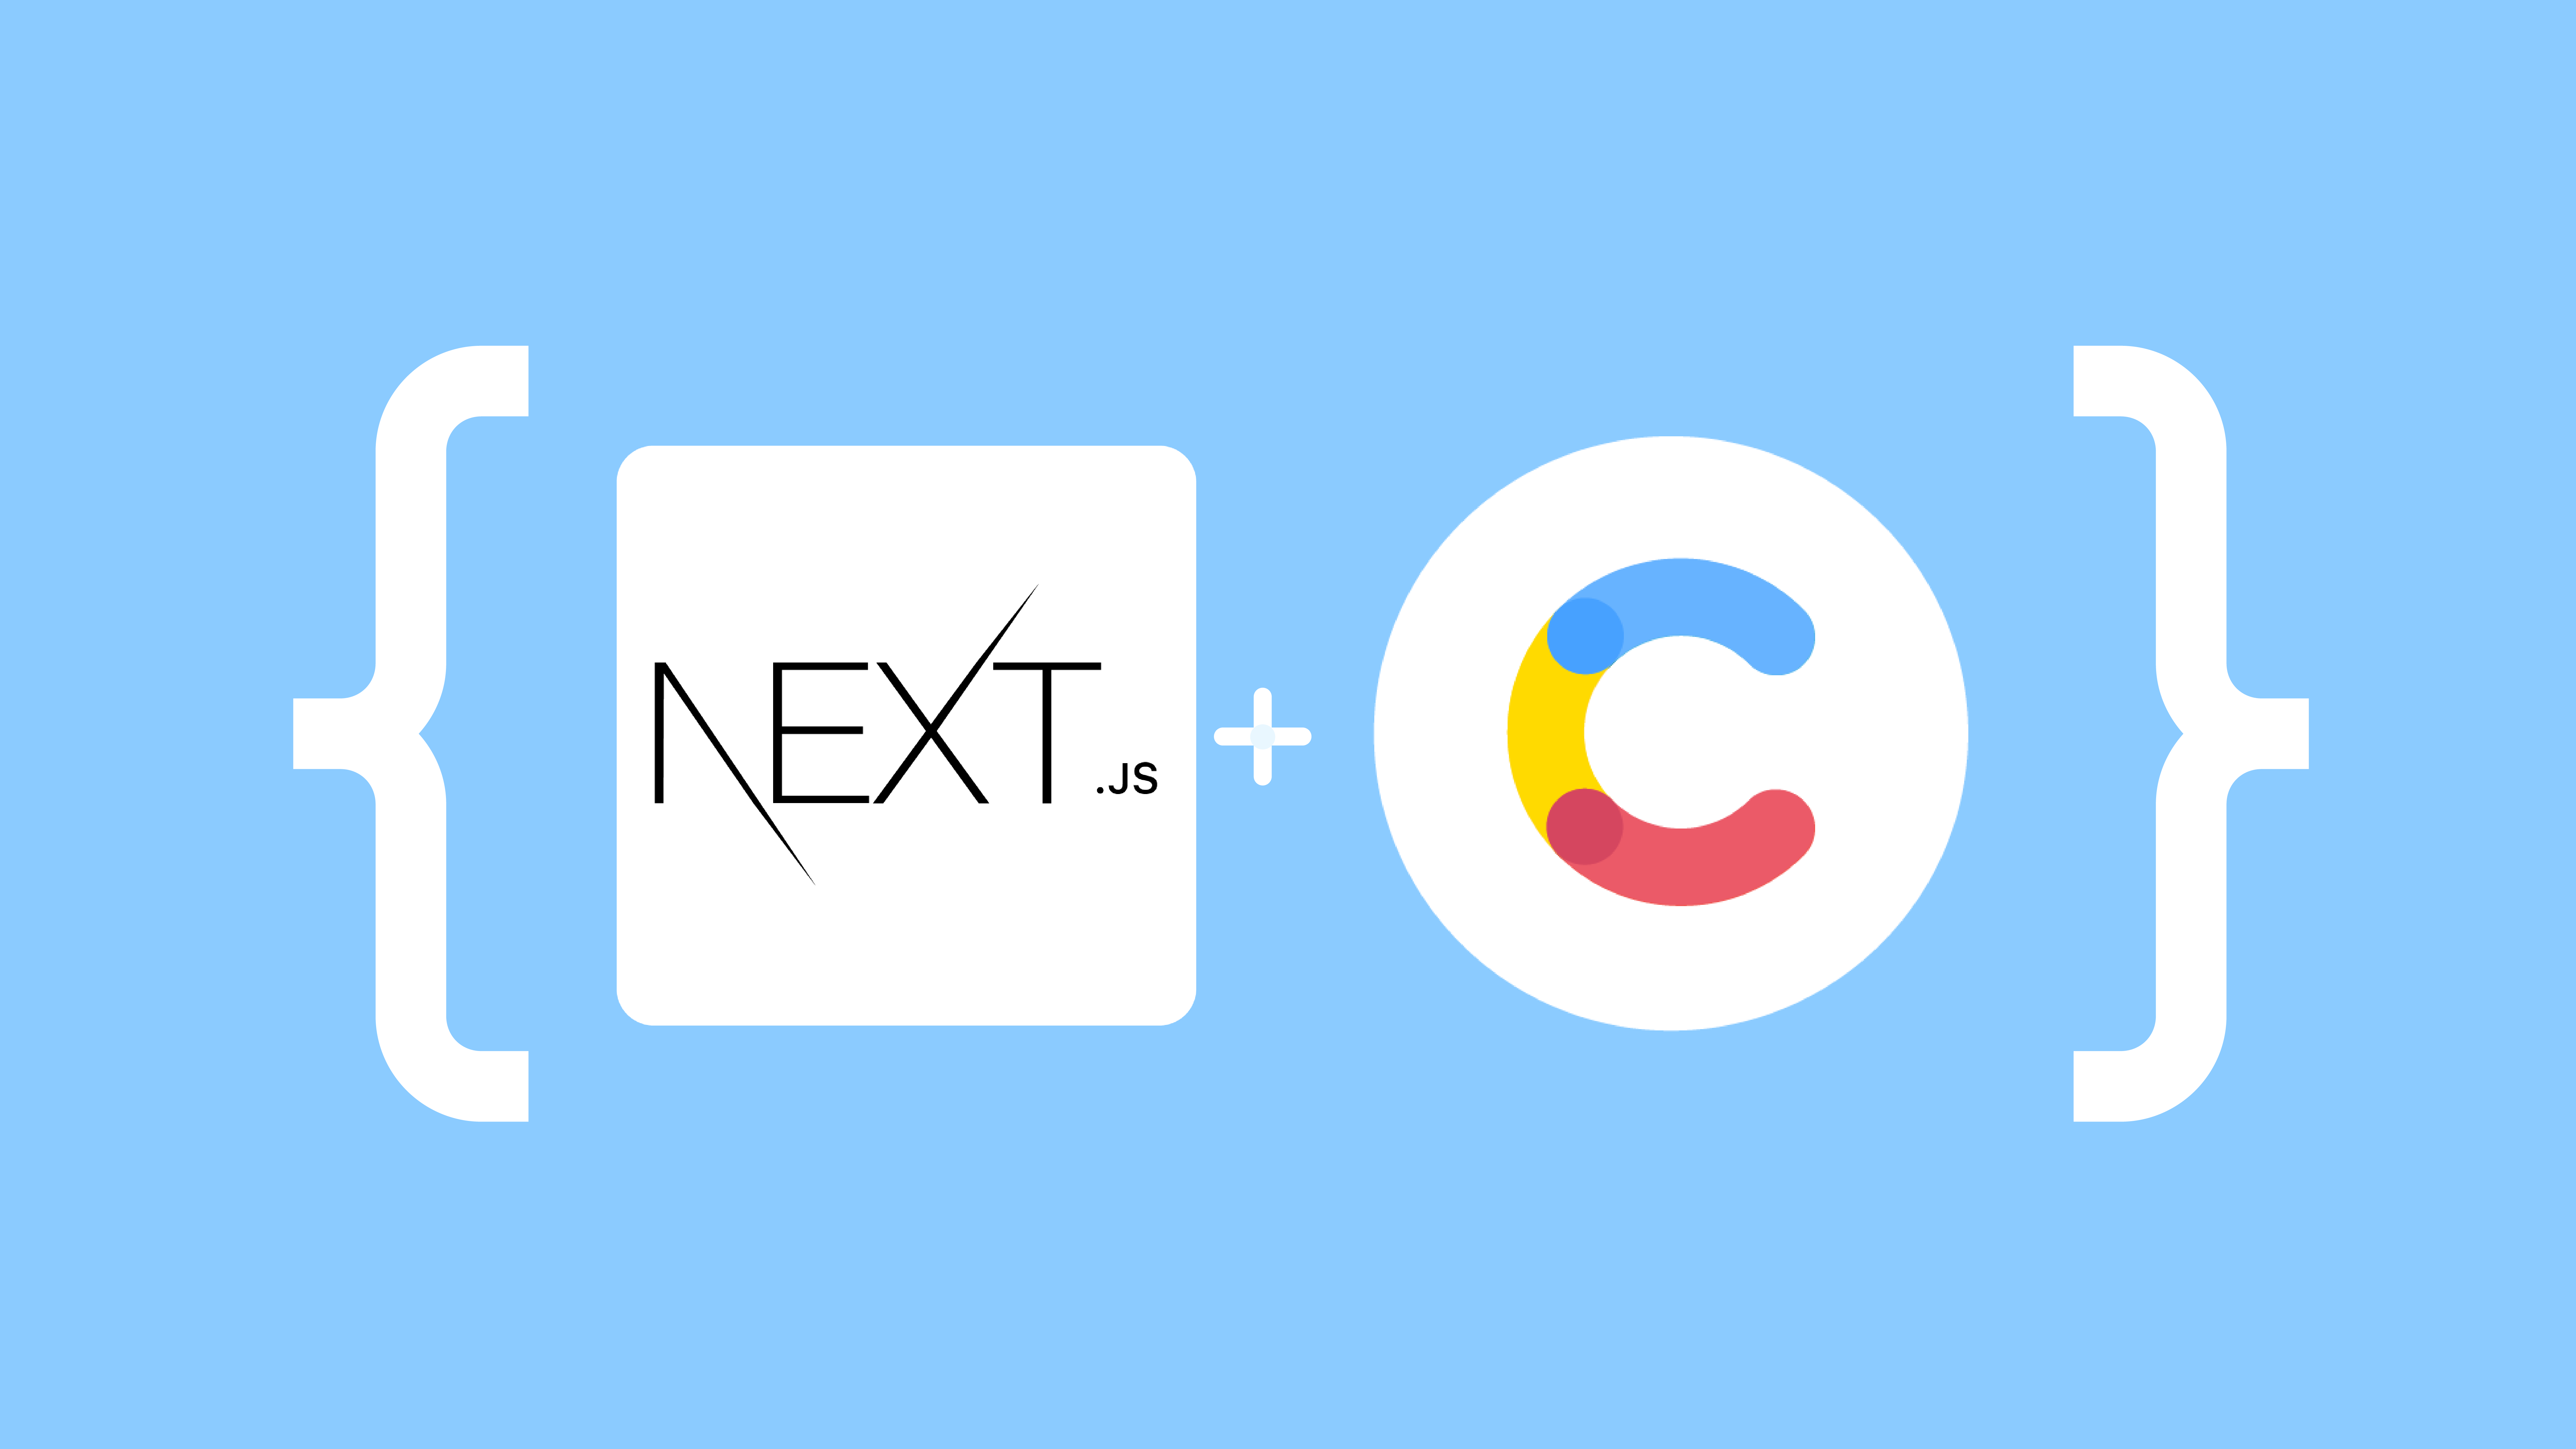 Logo of Next.js and logo of Contentful within curly brackets 